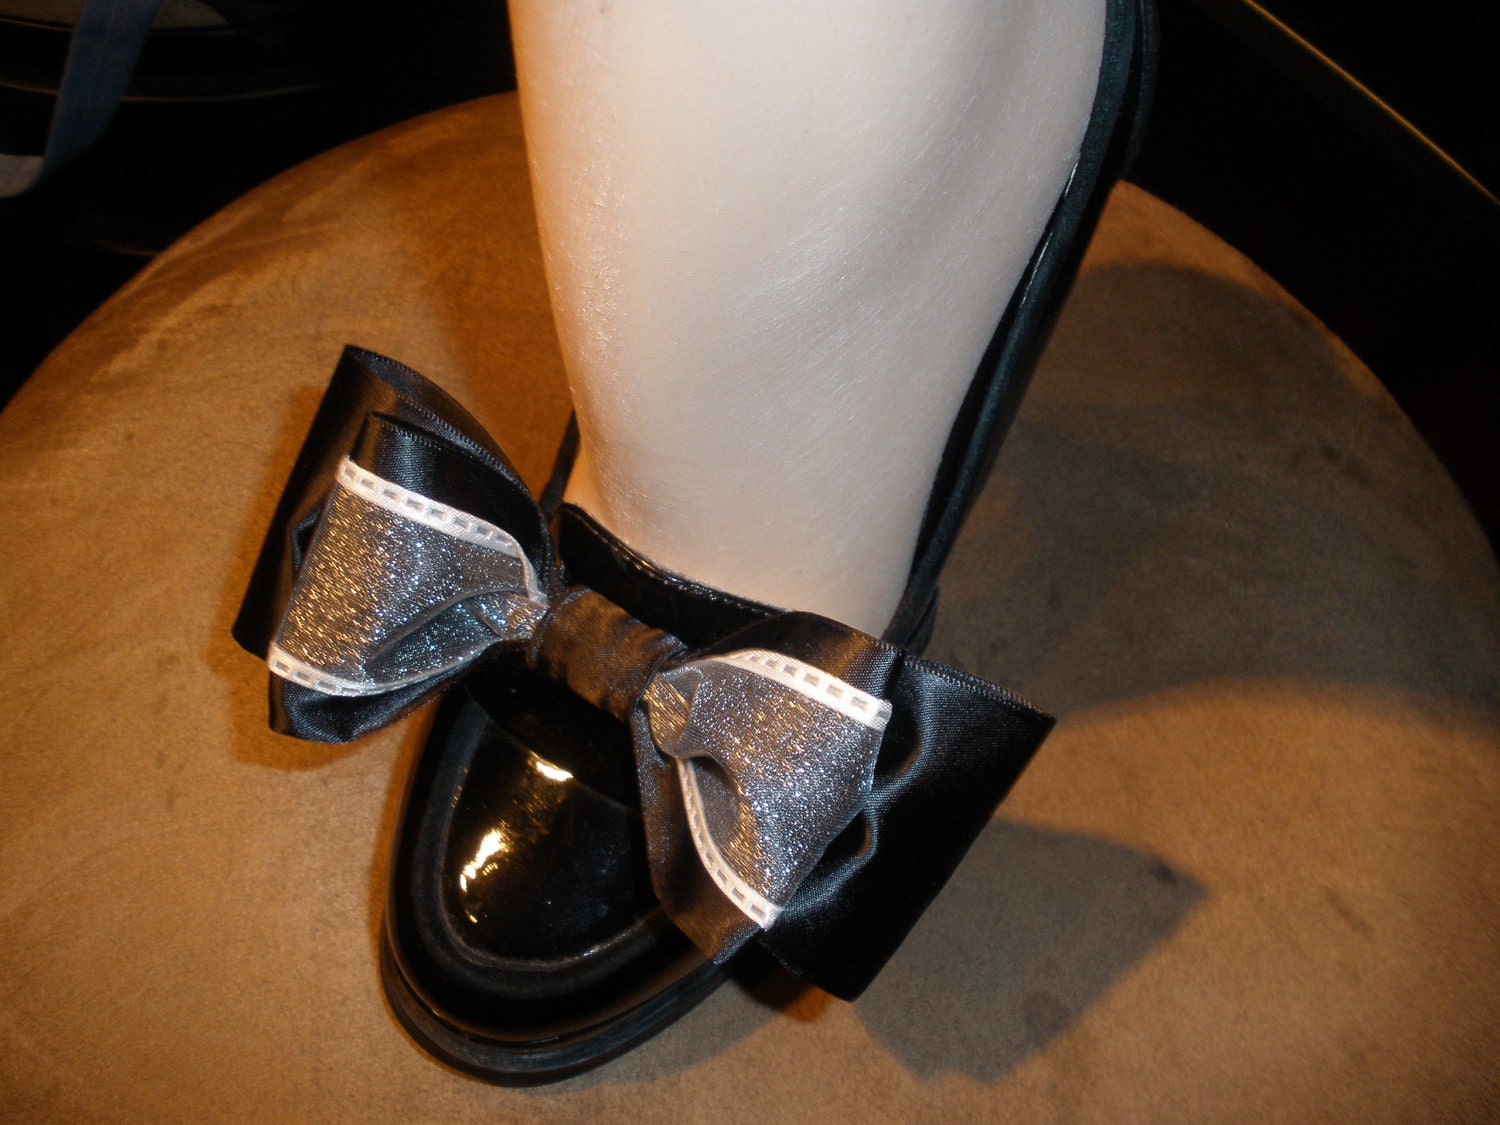 Attractive Black and White Shoe Bow Wrap Accessories for Your High Heel Shoes Not Shoe Clips